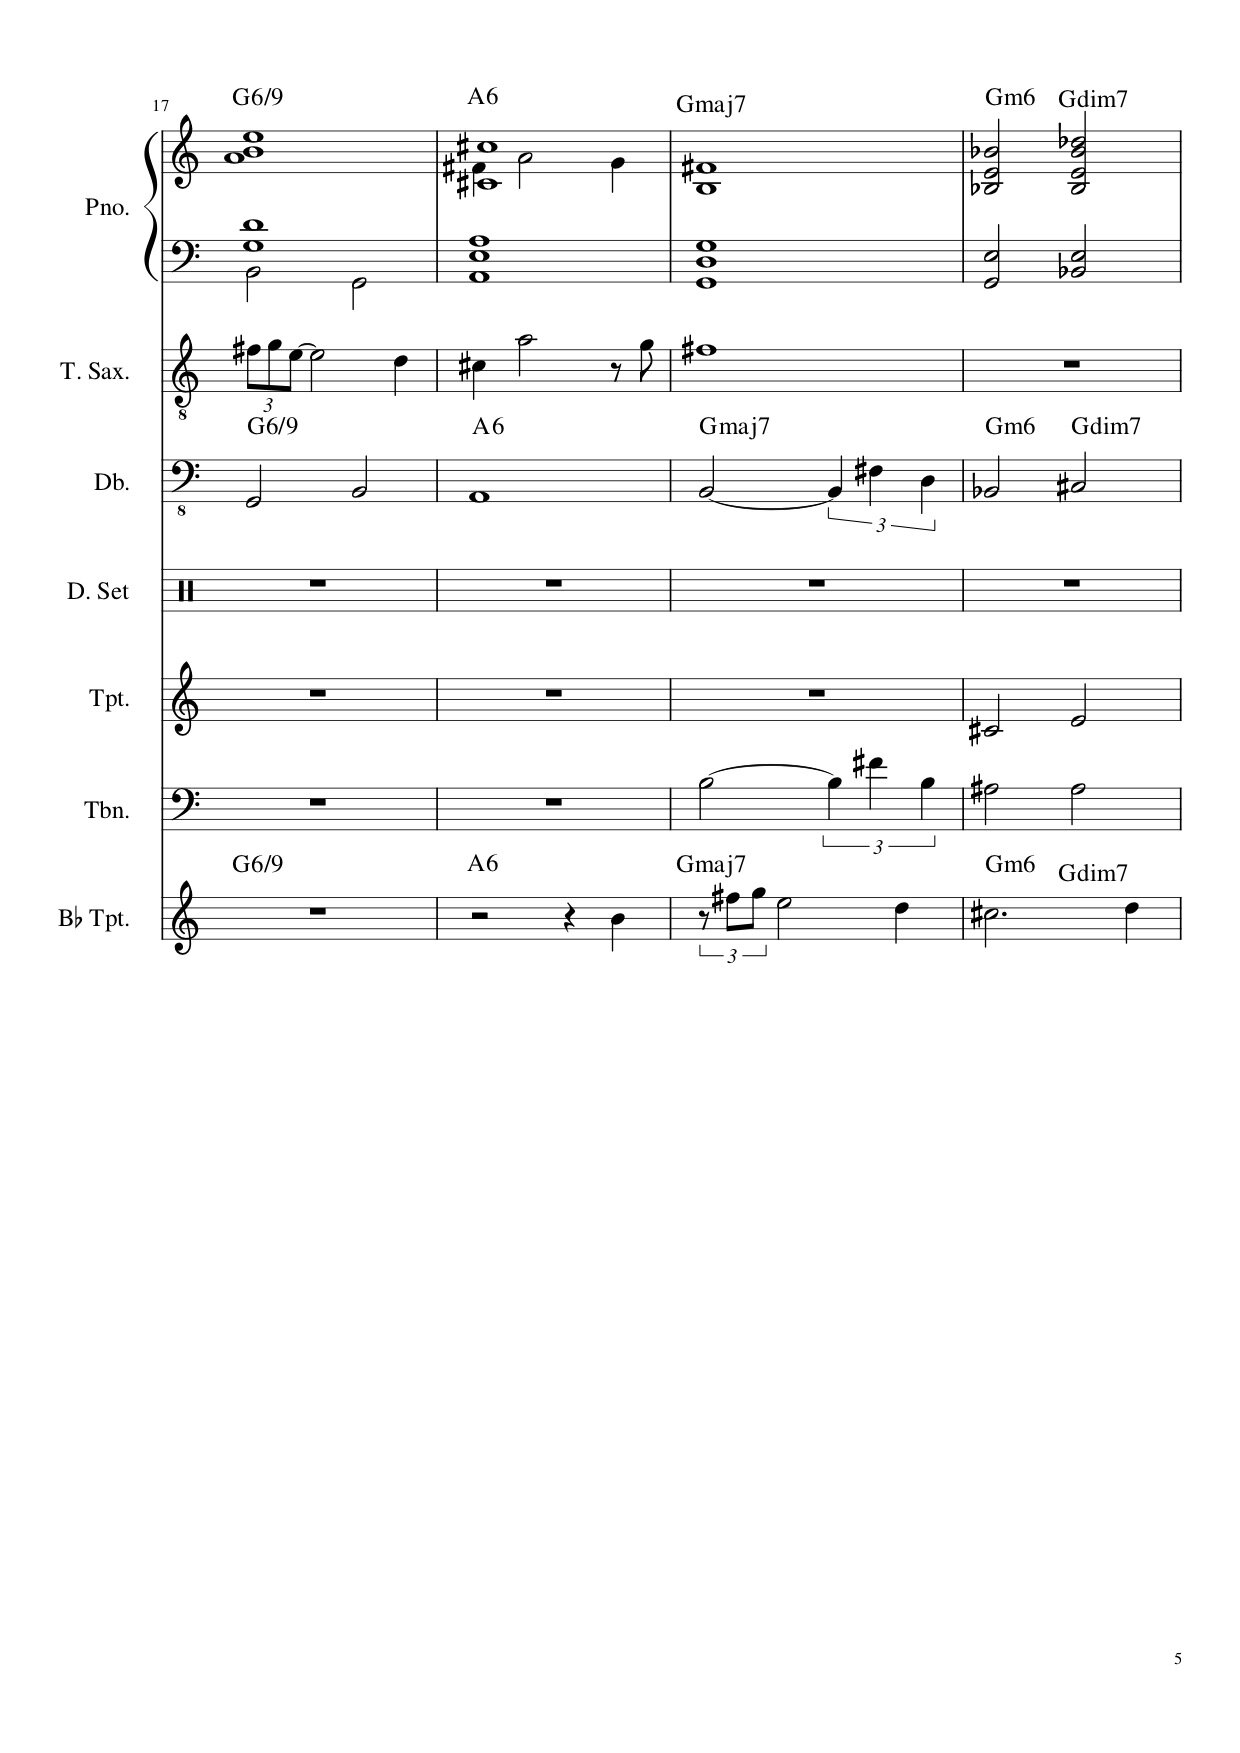 Steal Suffering Theme-Score_and_Parts pg5.jpg